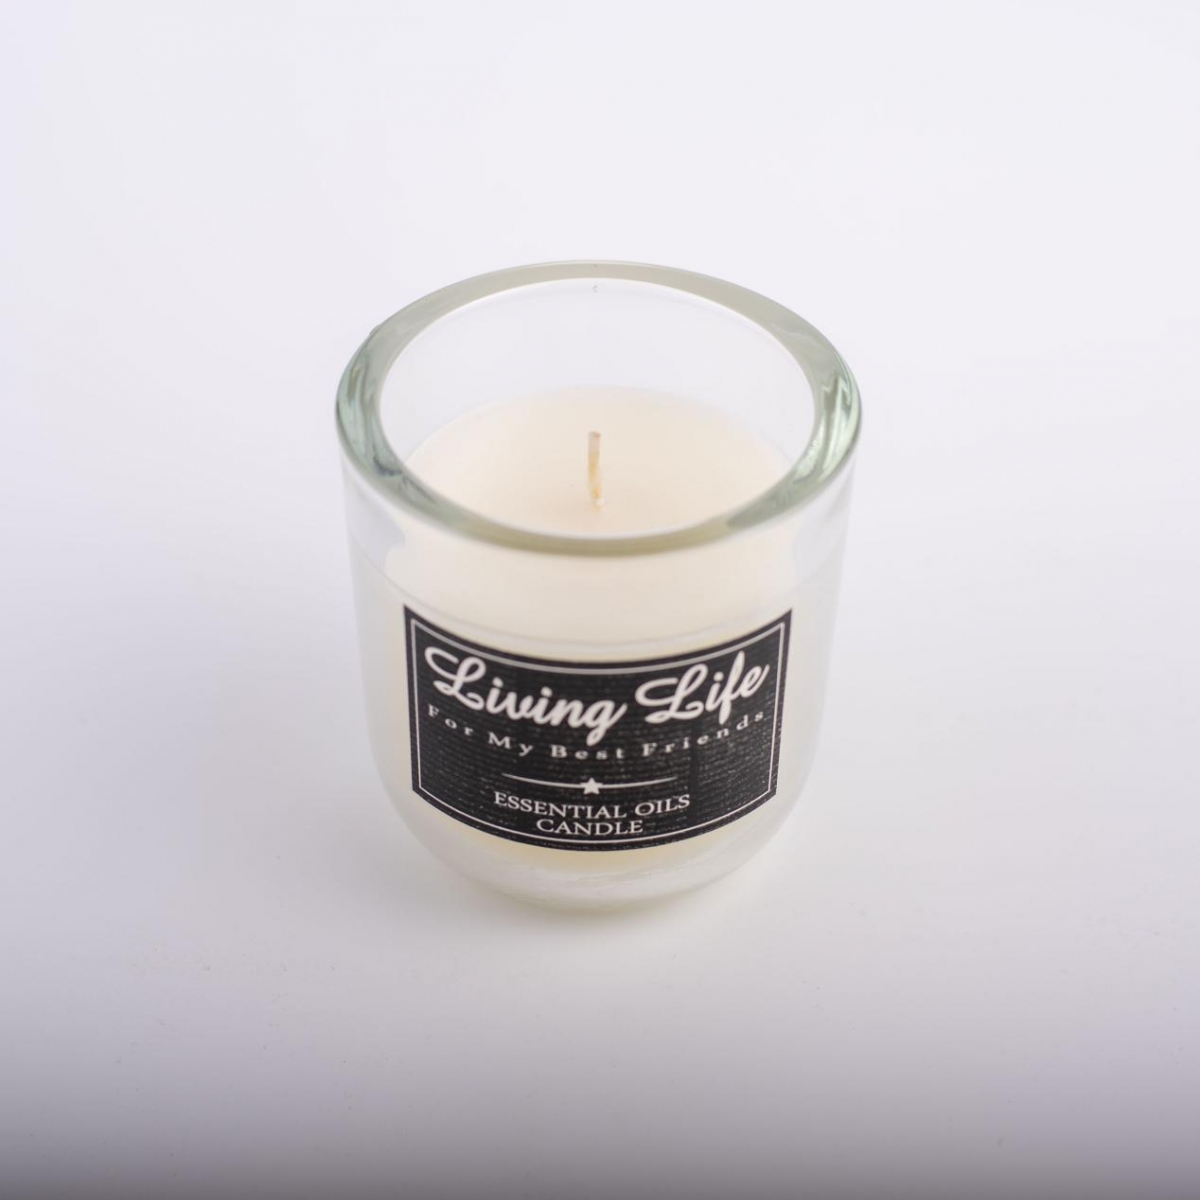 Scented Candles – White Vegan Candles ,Season Candles ,Meditation ,China Factory ,Price-HOWCANDLE-Candles,Scented Candles,Aromatherapy Candles,Soy Candles,Vegan Candles,Jar Candles,Pillar Candles,Candle Gift Sets,Essential Oils,Reed Diffuser,Candle Holder,